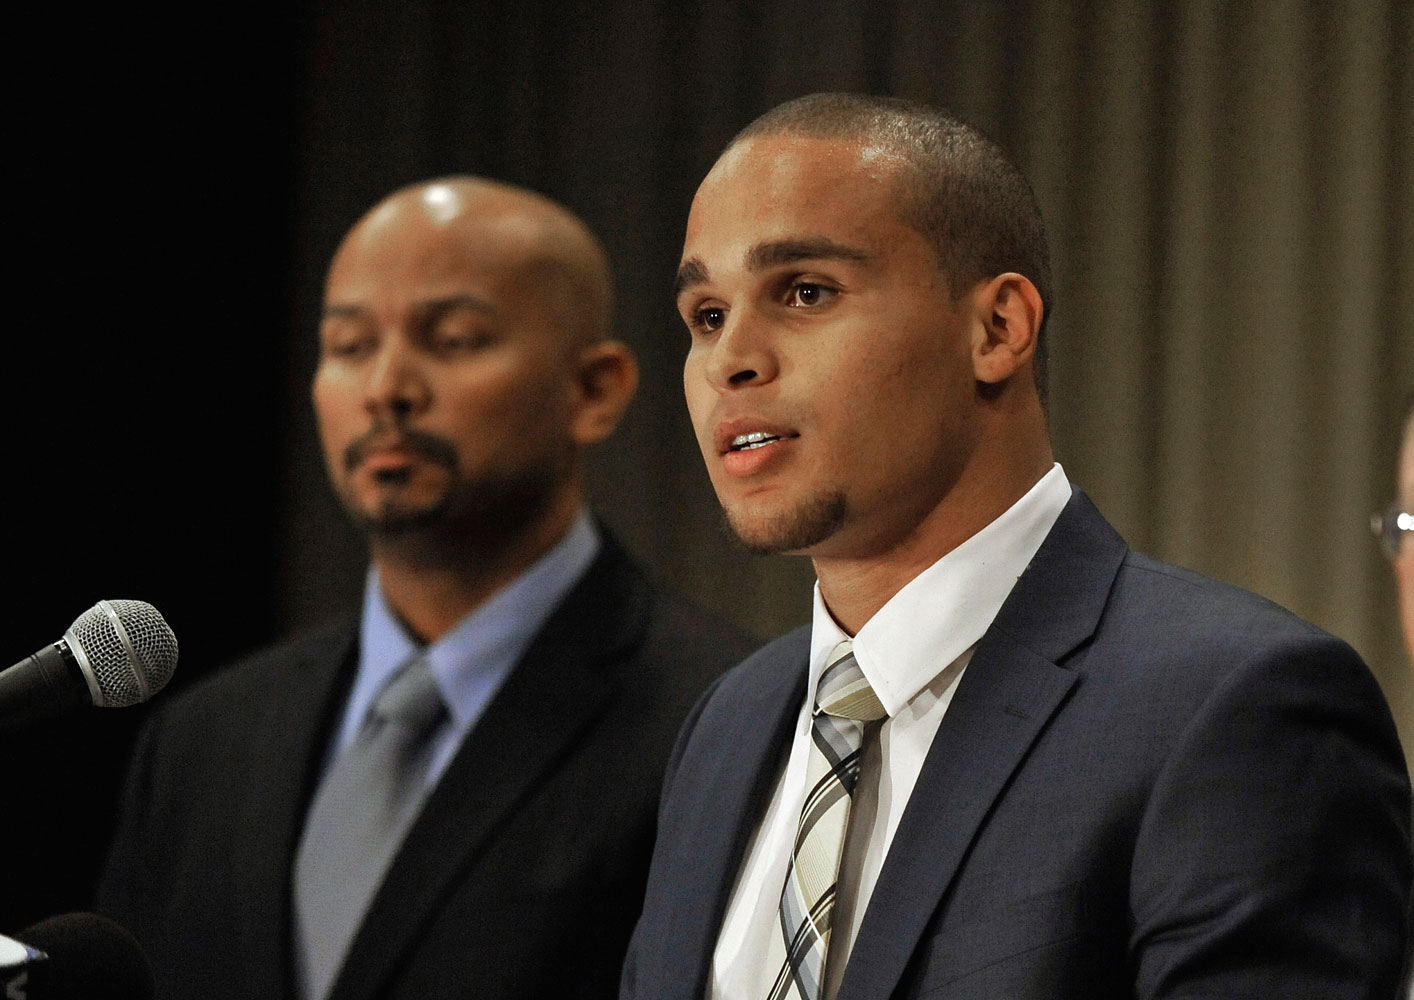 Northwestern quarterback Kain Colter, right, speaks while College Athletes Players Association President Ramogi Huma listens during a news conference in Chicago, Jan. 28, 2014. (Paul Beaty—AP)